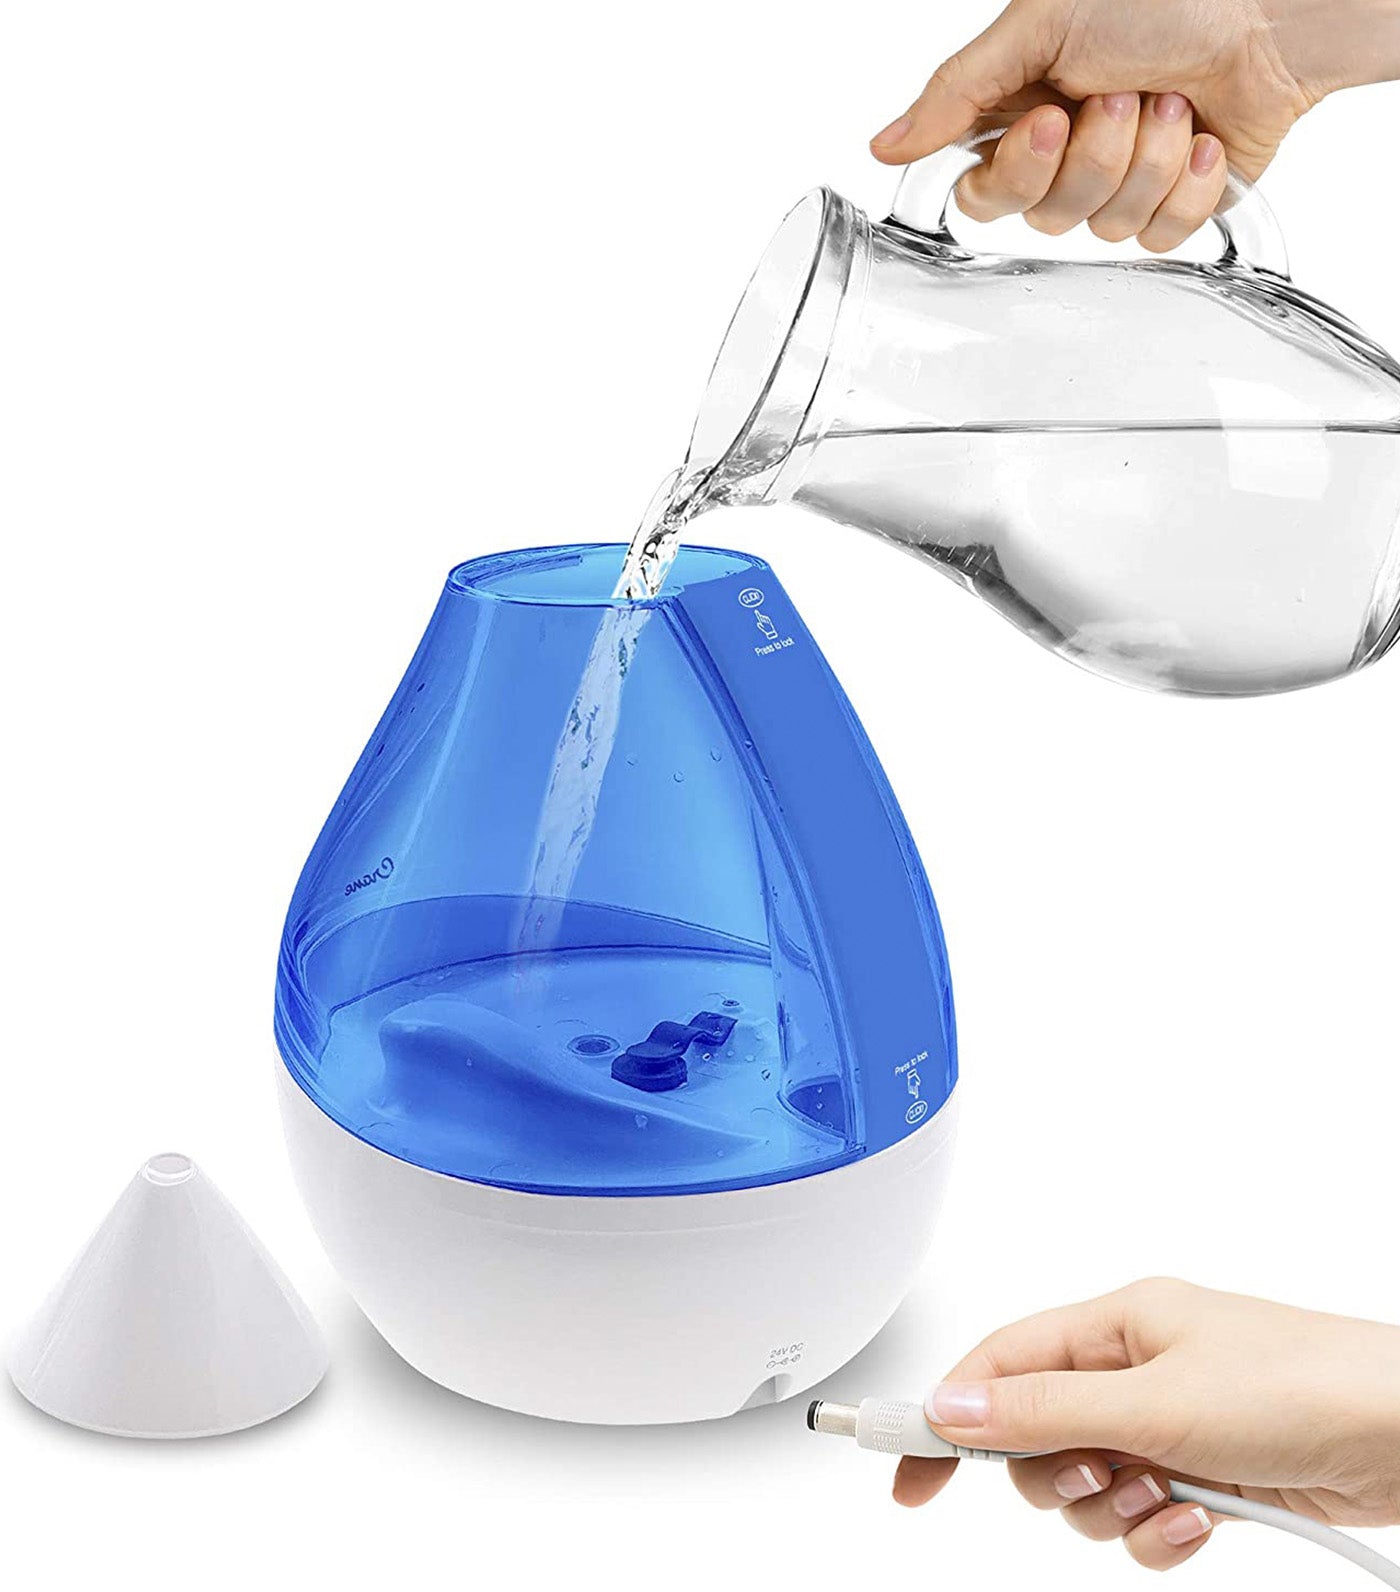 4-in-1 Top Fill Humidifier with Sound Machine and Vaporizer Function - Blue-White